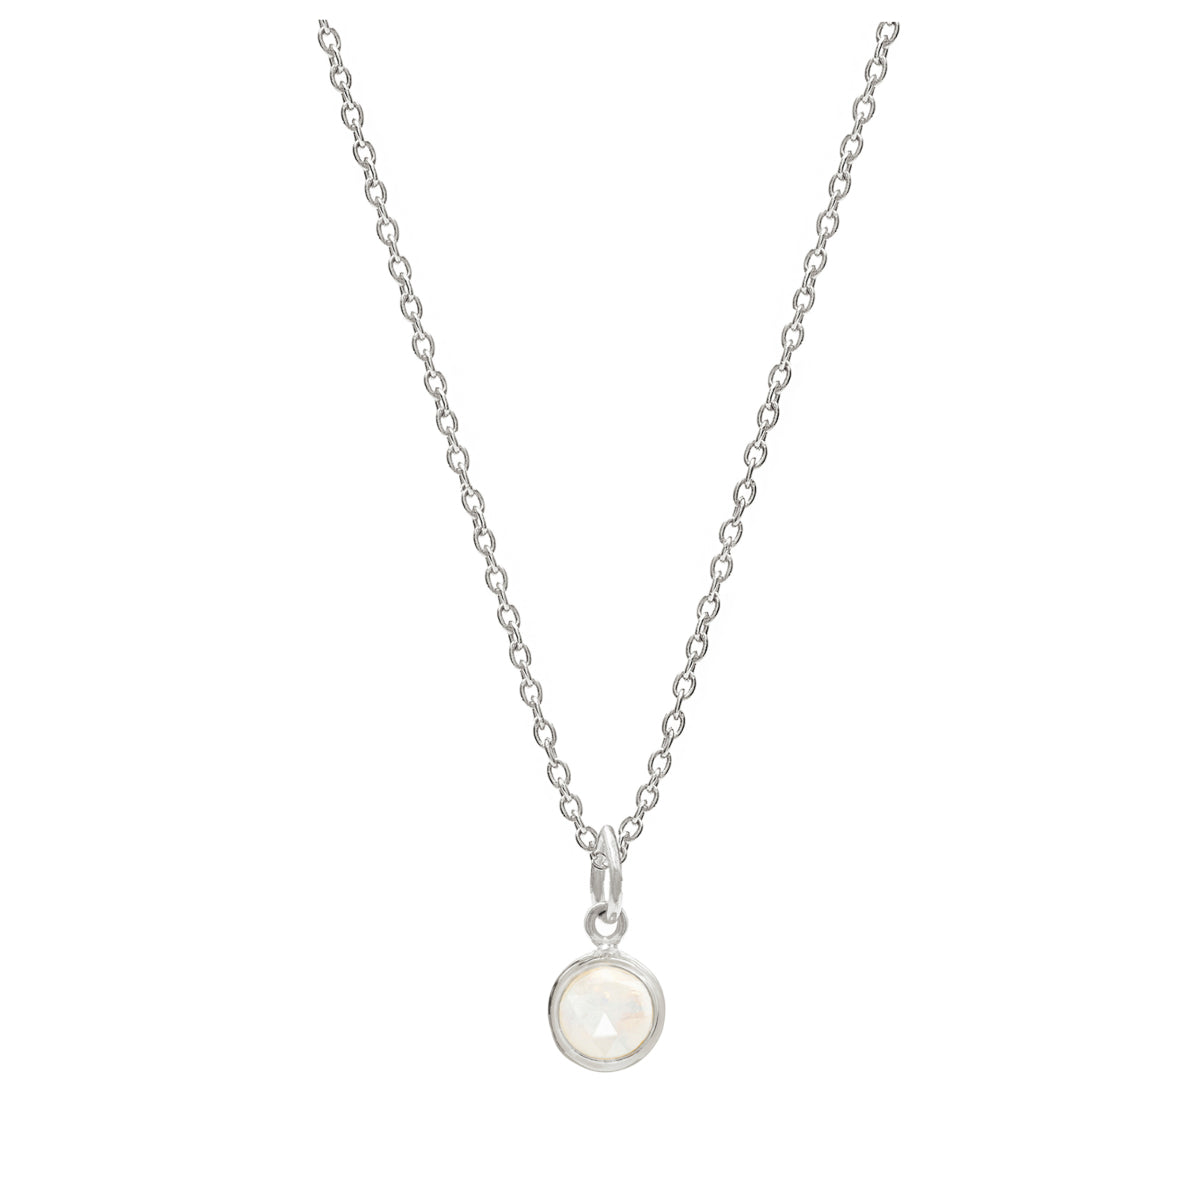 Silver Birthstone Necklace with Moonstone (October) - Lulu B Jewellery